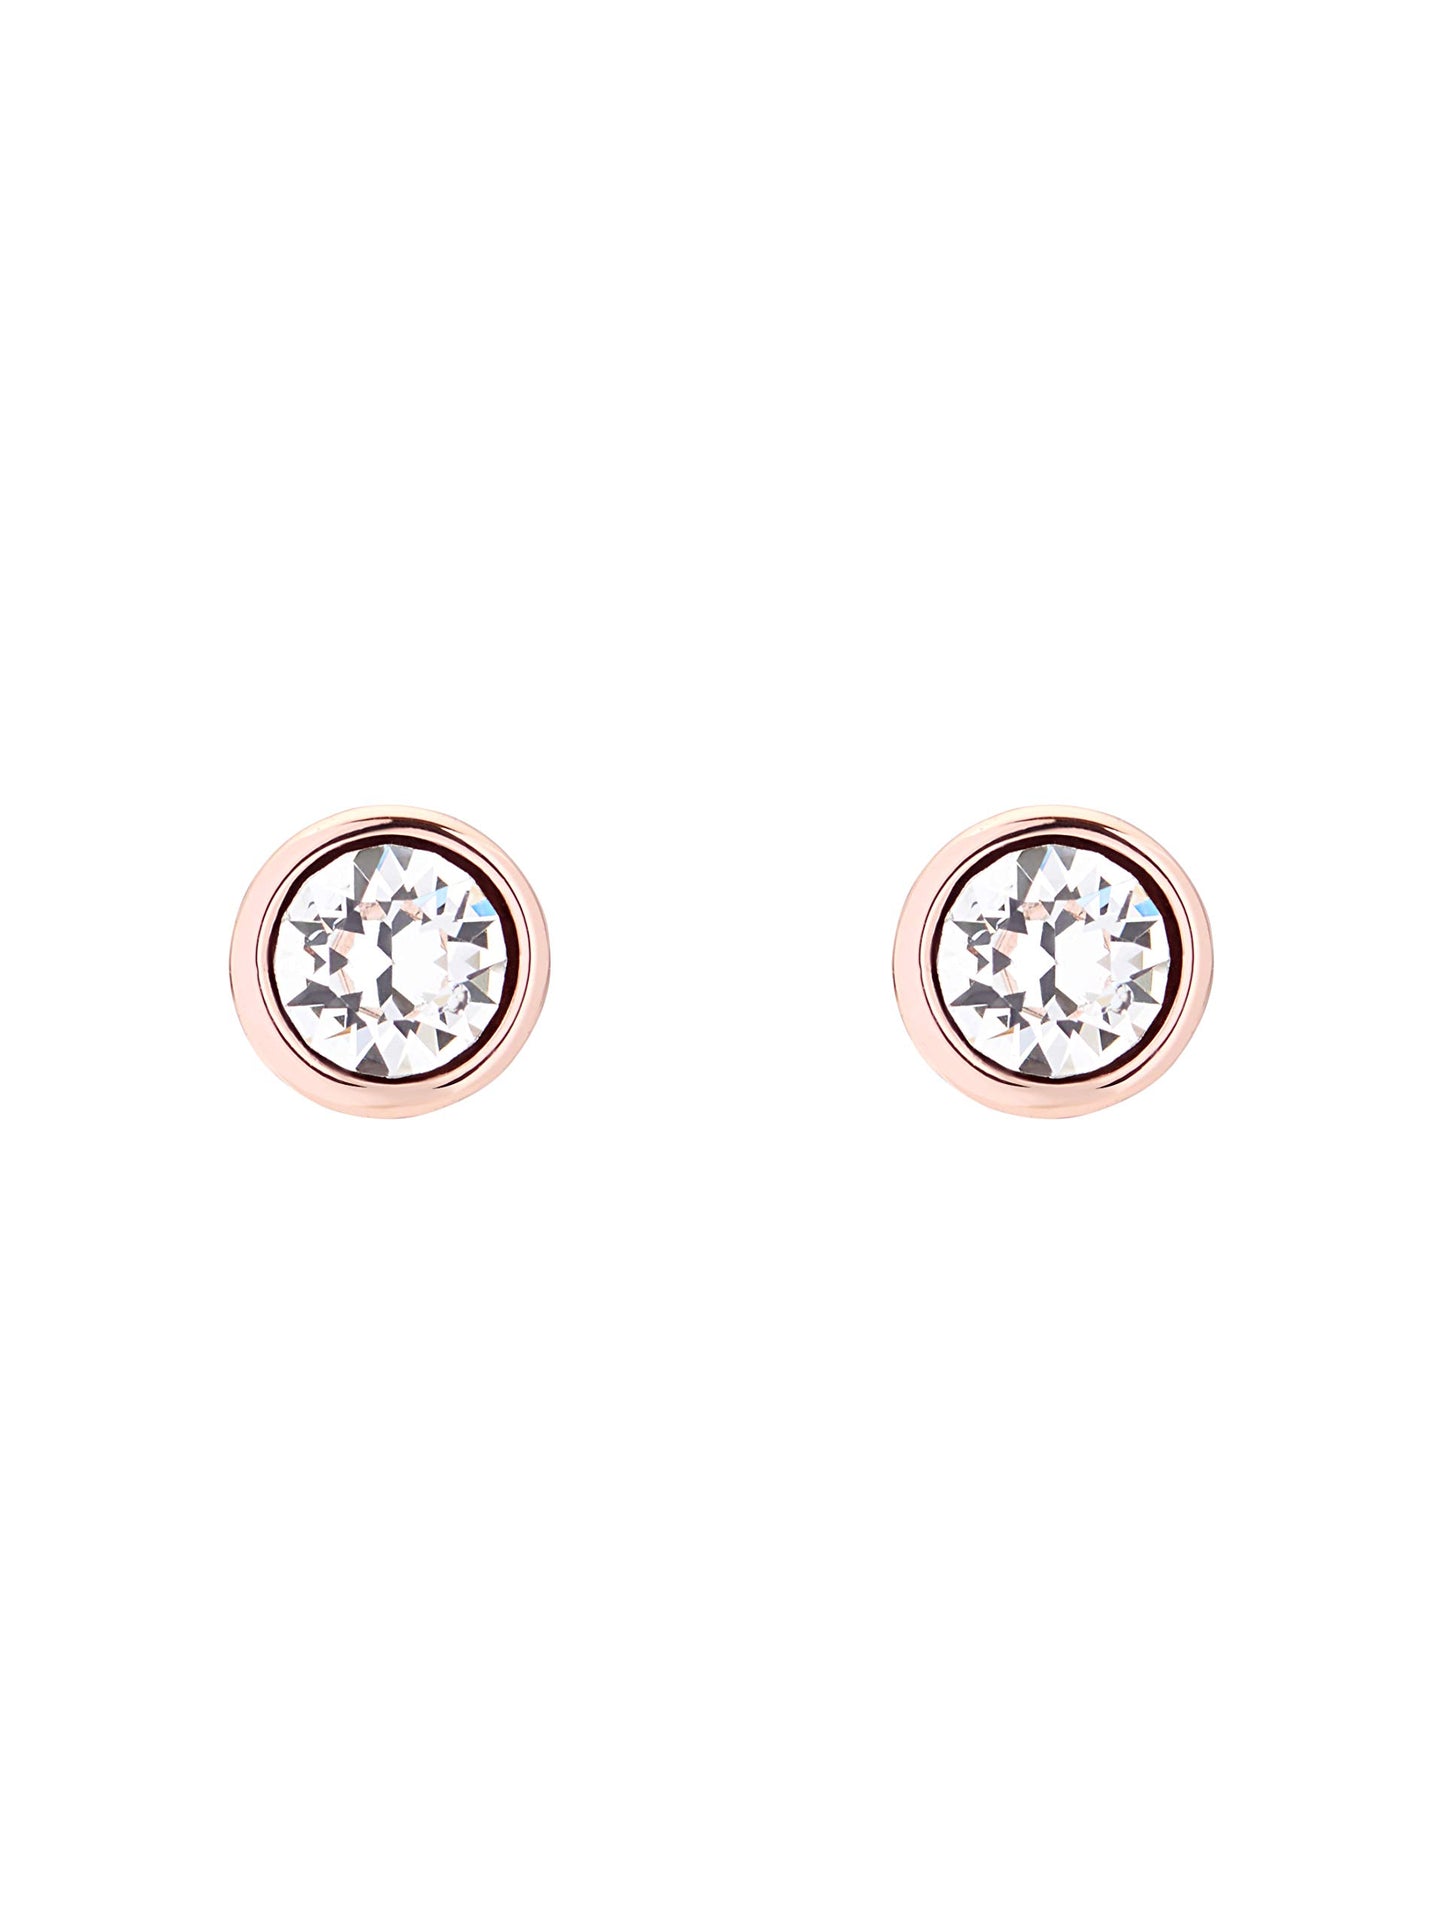 Ted Baker Sinaa Crystal Stud Earrings - Silver or Rose Gold Tone Options